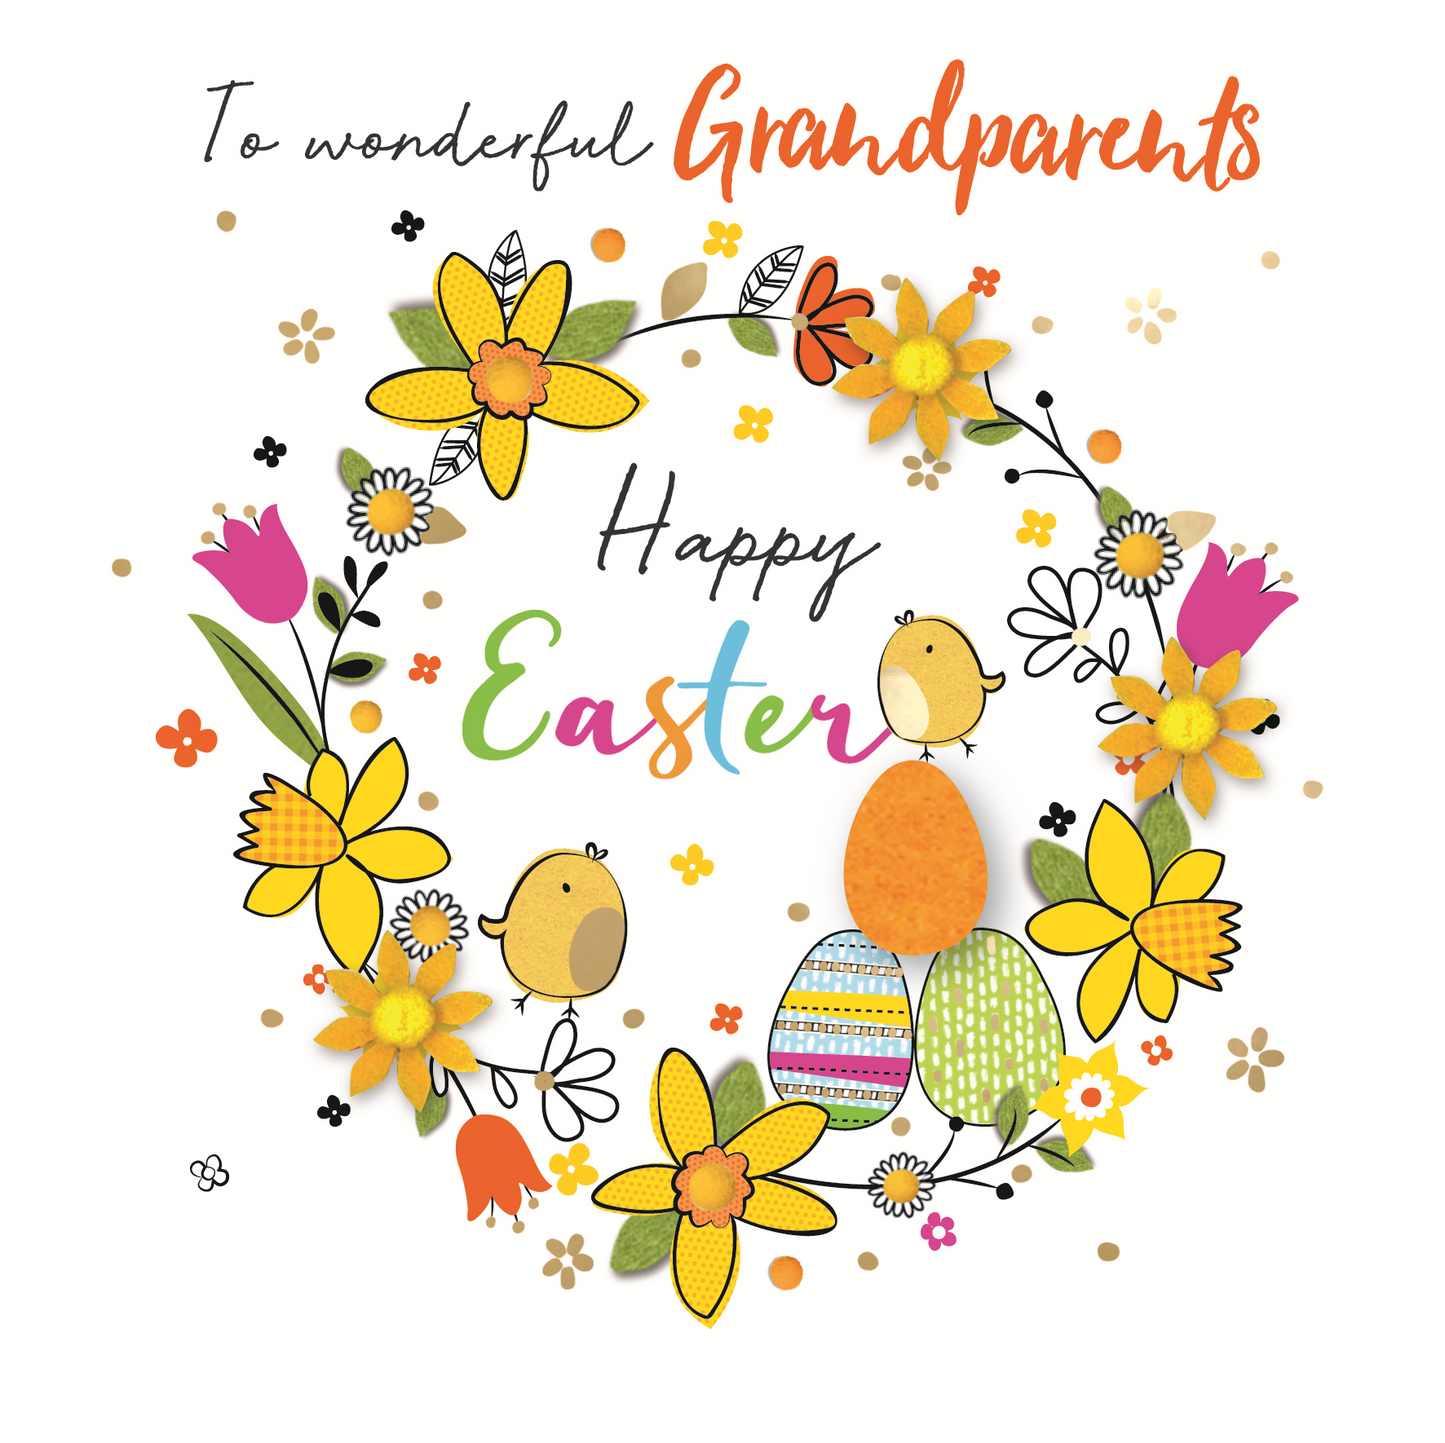 Wonderful Grandparents Hand-Finished Easter Greeting Card